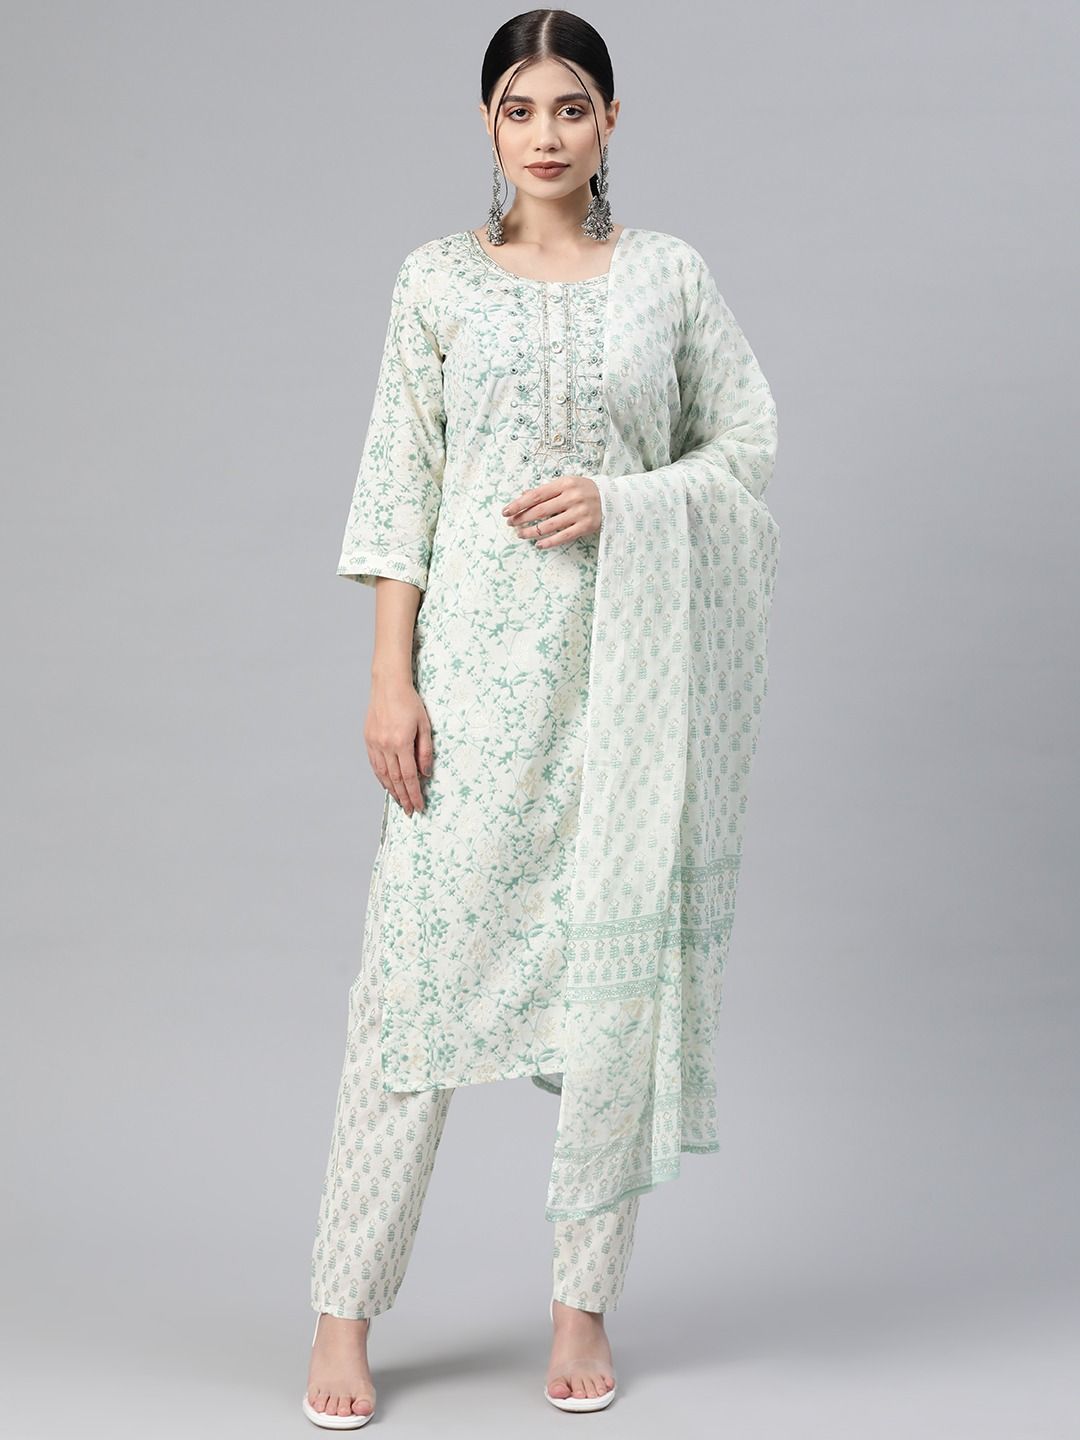 Straight Style Cotton Fabric Cream & Green Color Kurti And Bottom With Dupatta